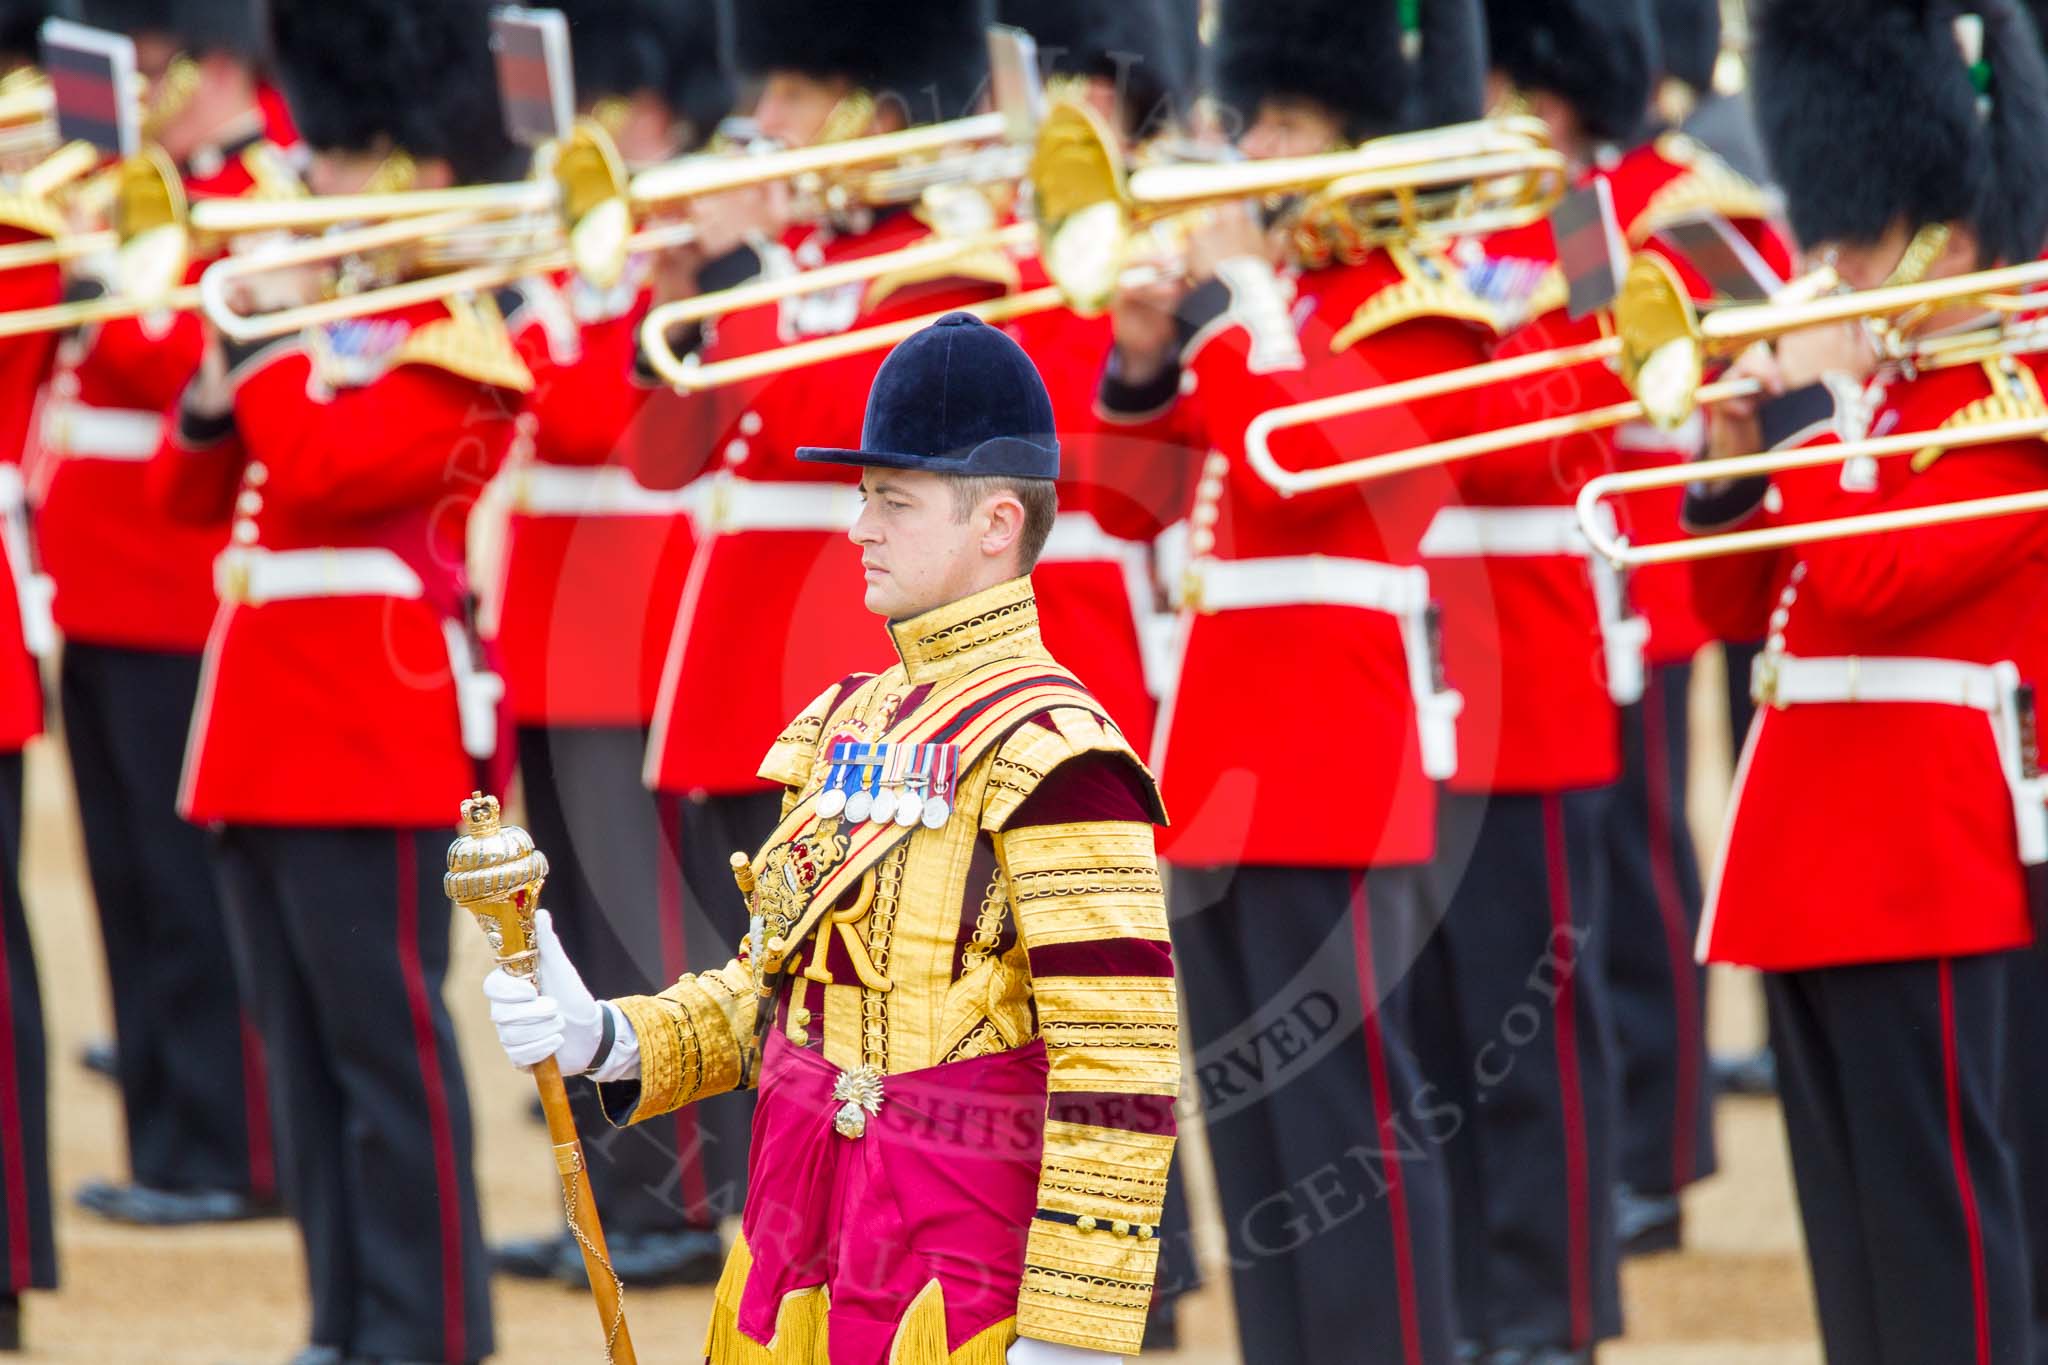 Trooping the Colour 2014.
Horse Guards Parade, Westminster,
London SW1A,

United Kingdom,
on 14 June 2014 at 11:13, image #465